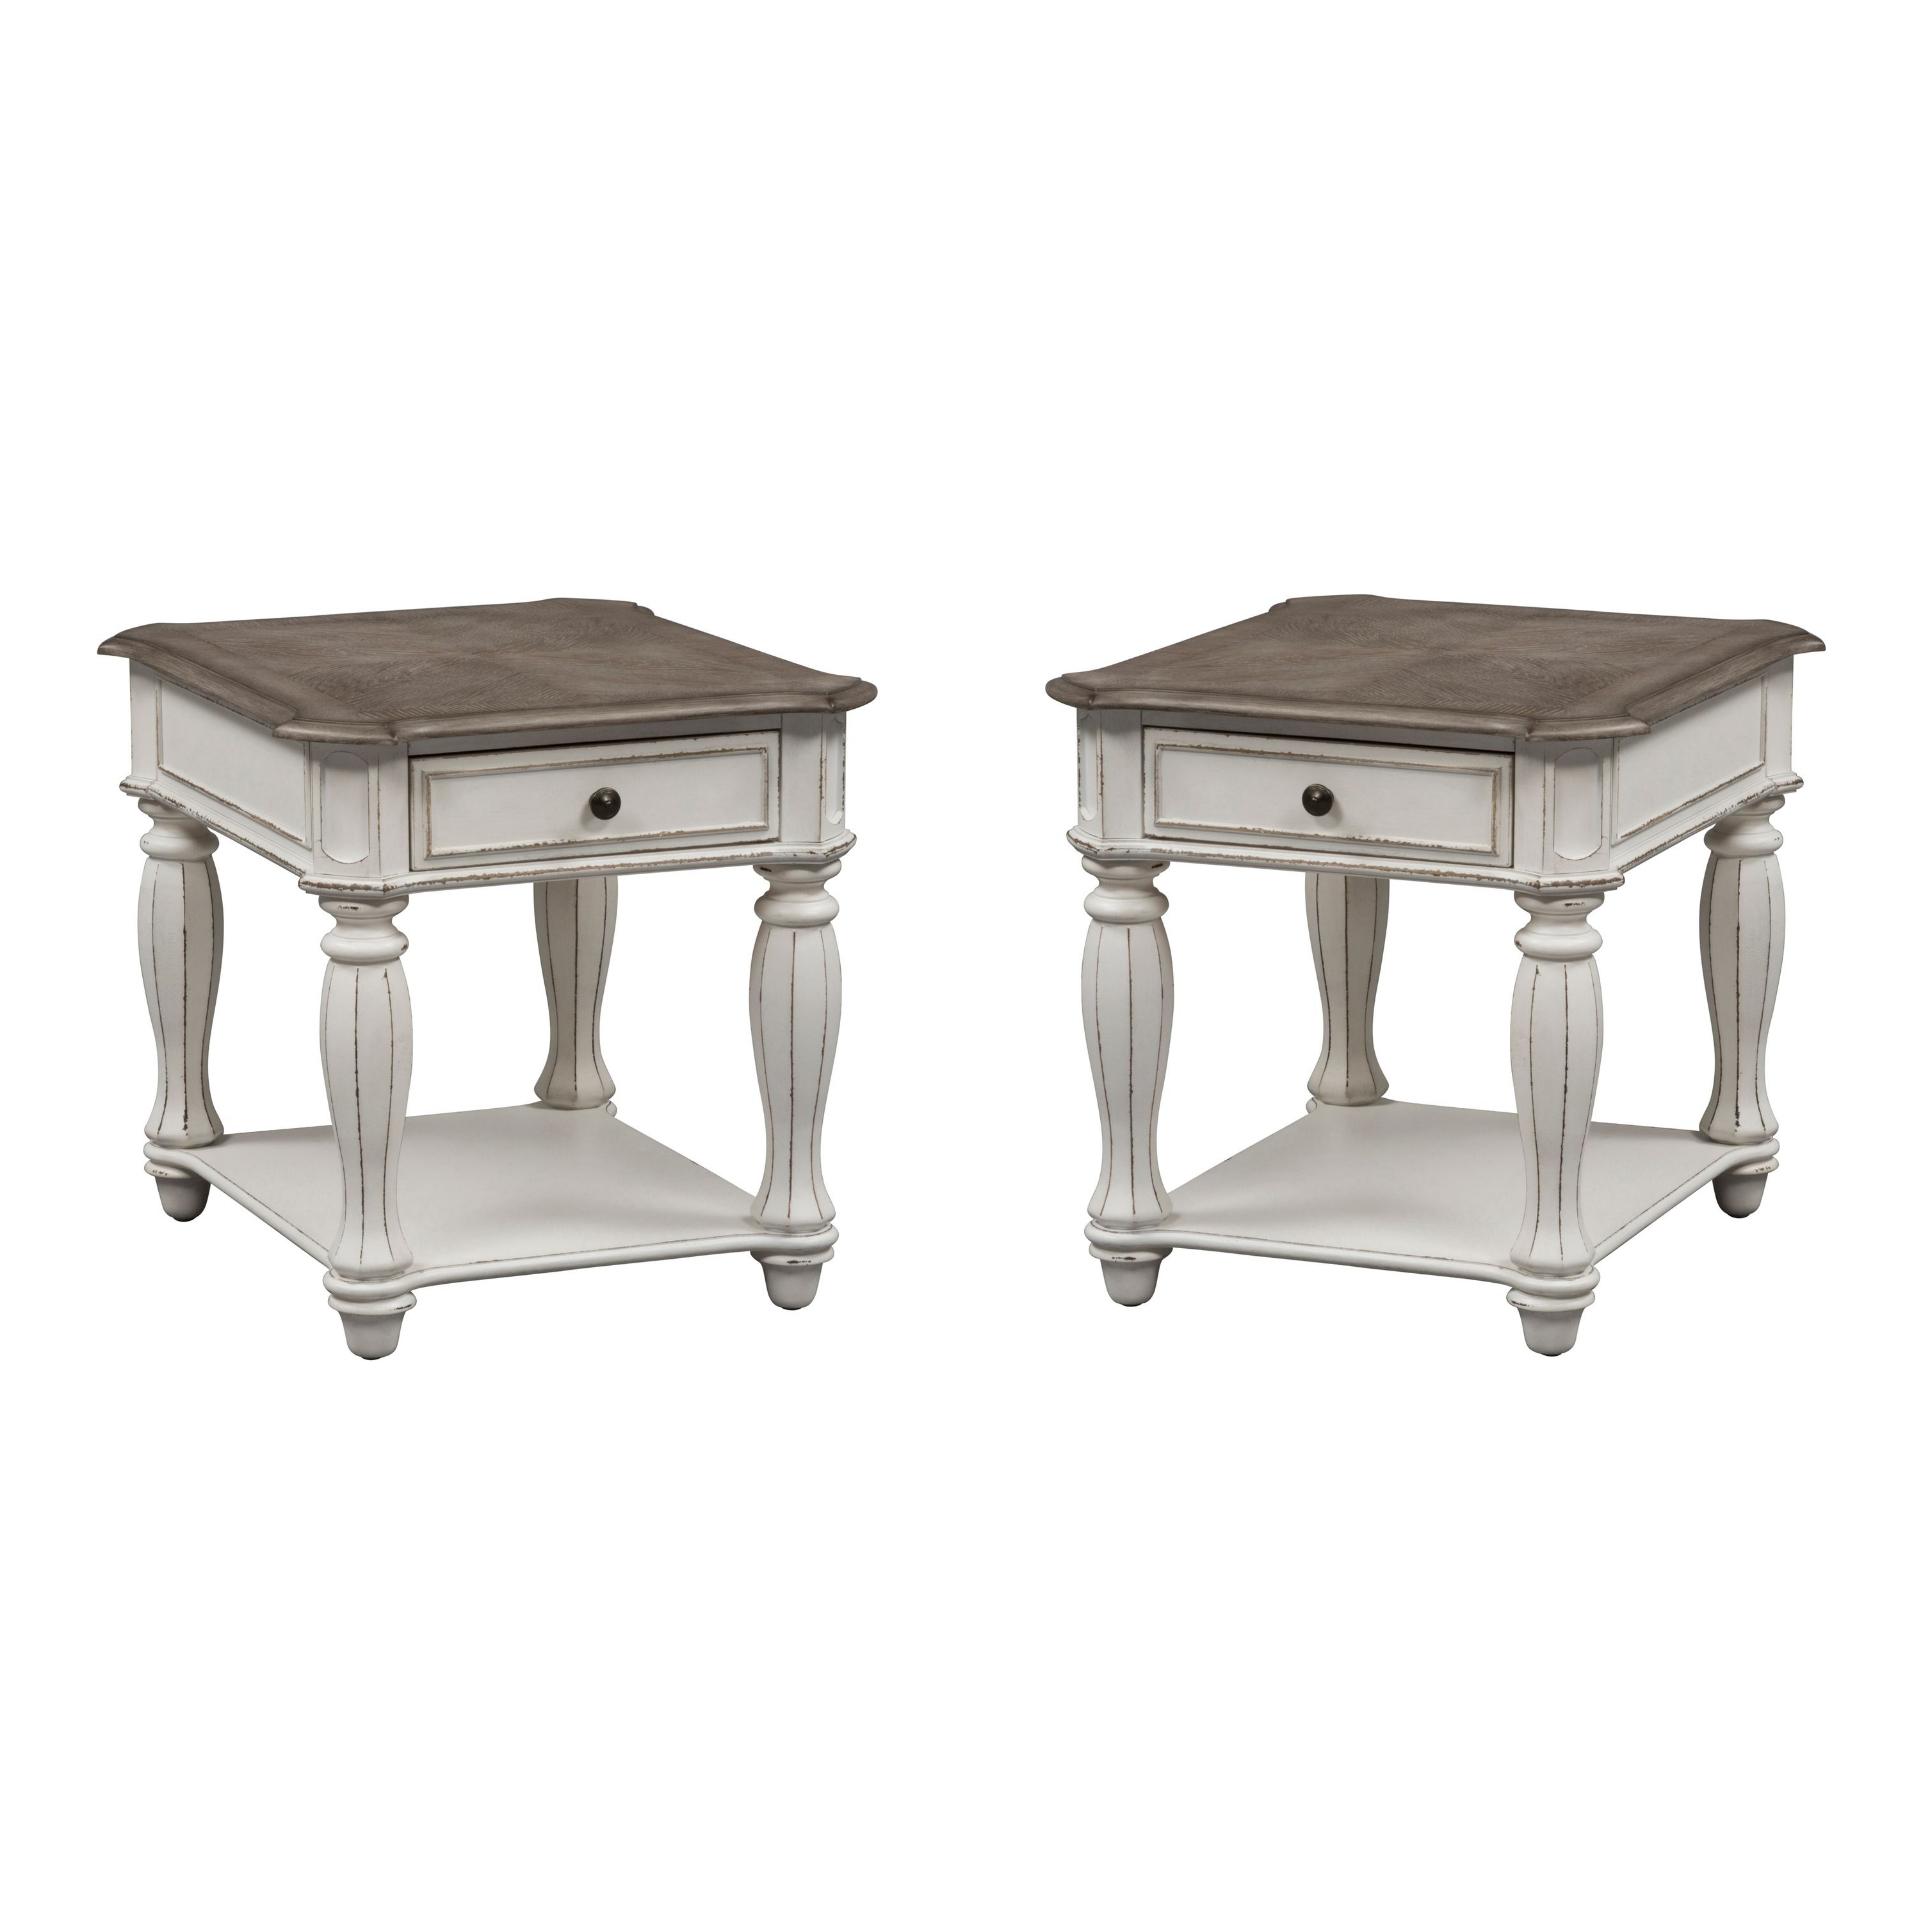 European Traditional End Table Set Magnolia Manor  (244-OT) End Table 244-OT1020-2PC in White 